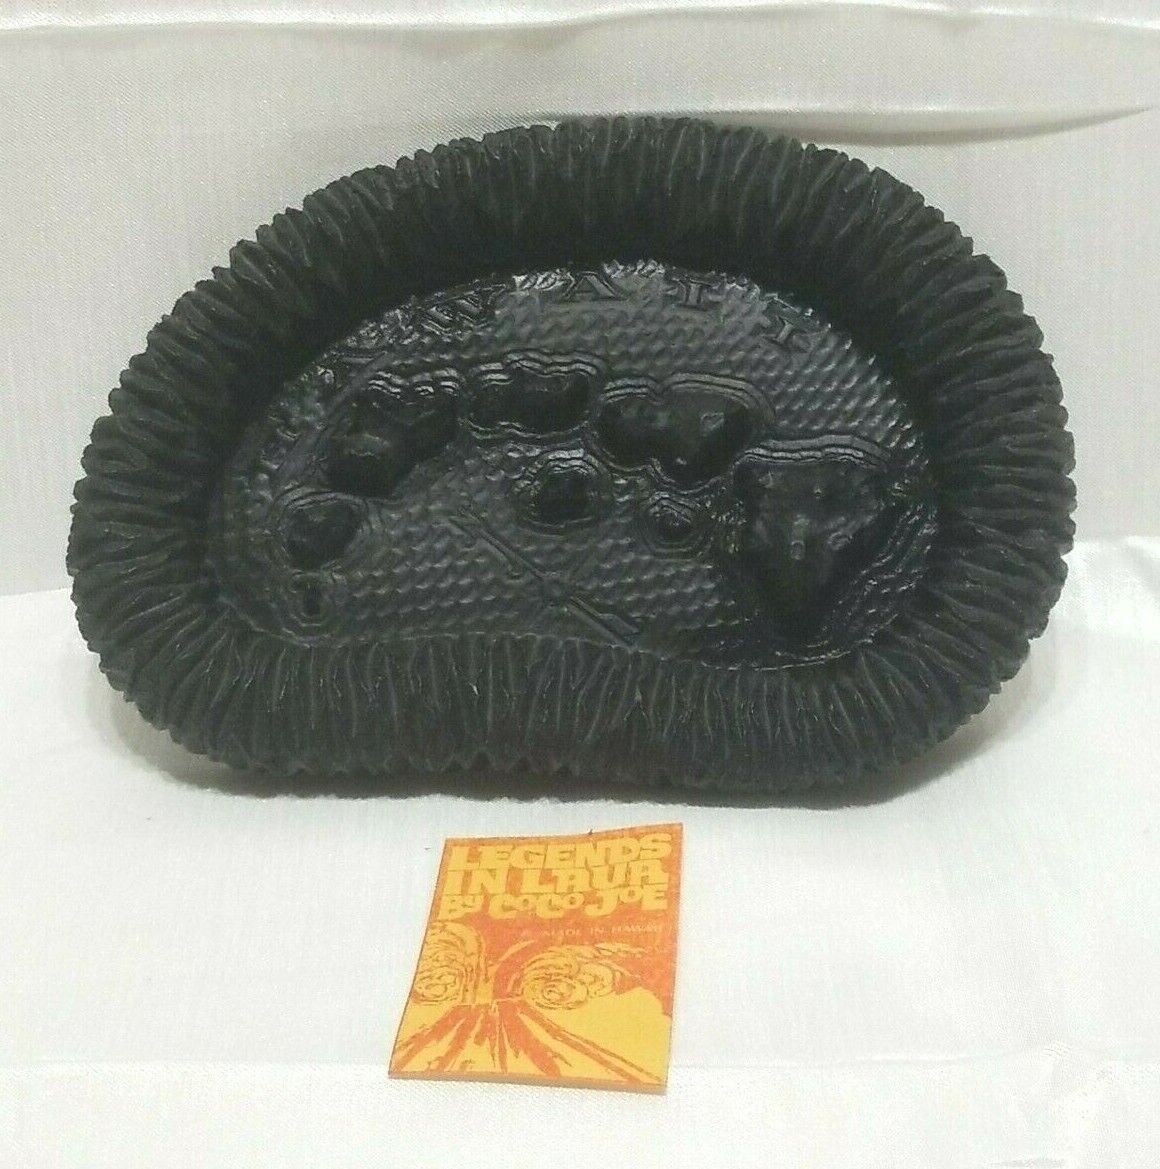 Vintage Legends In Lava by Coco Joe - Island Ash Tray (Not Used)